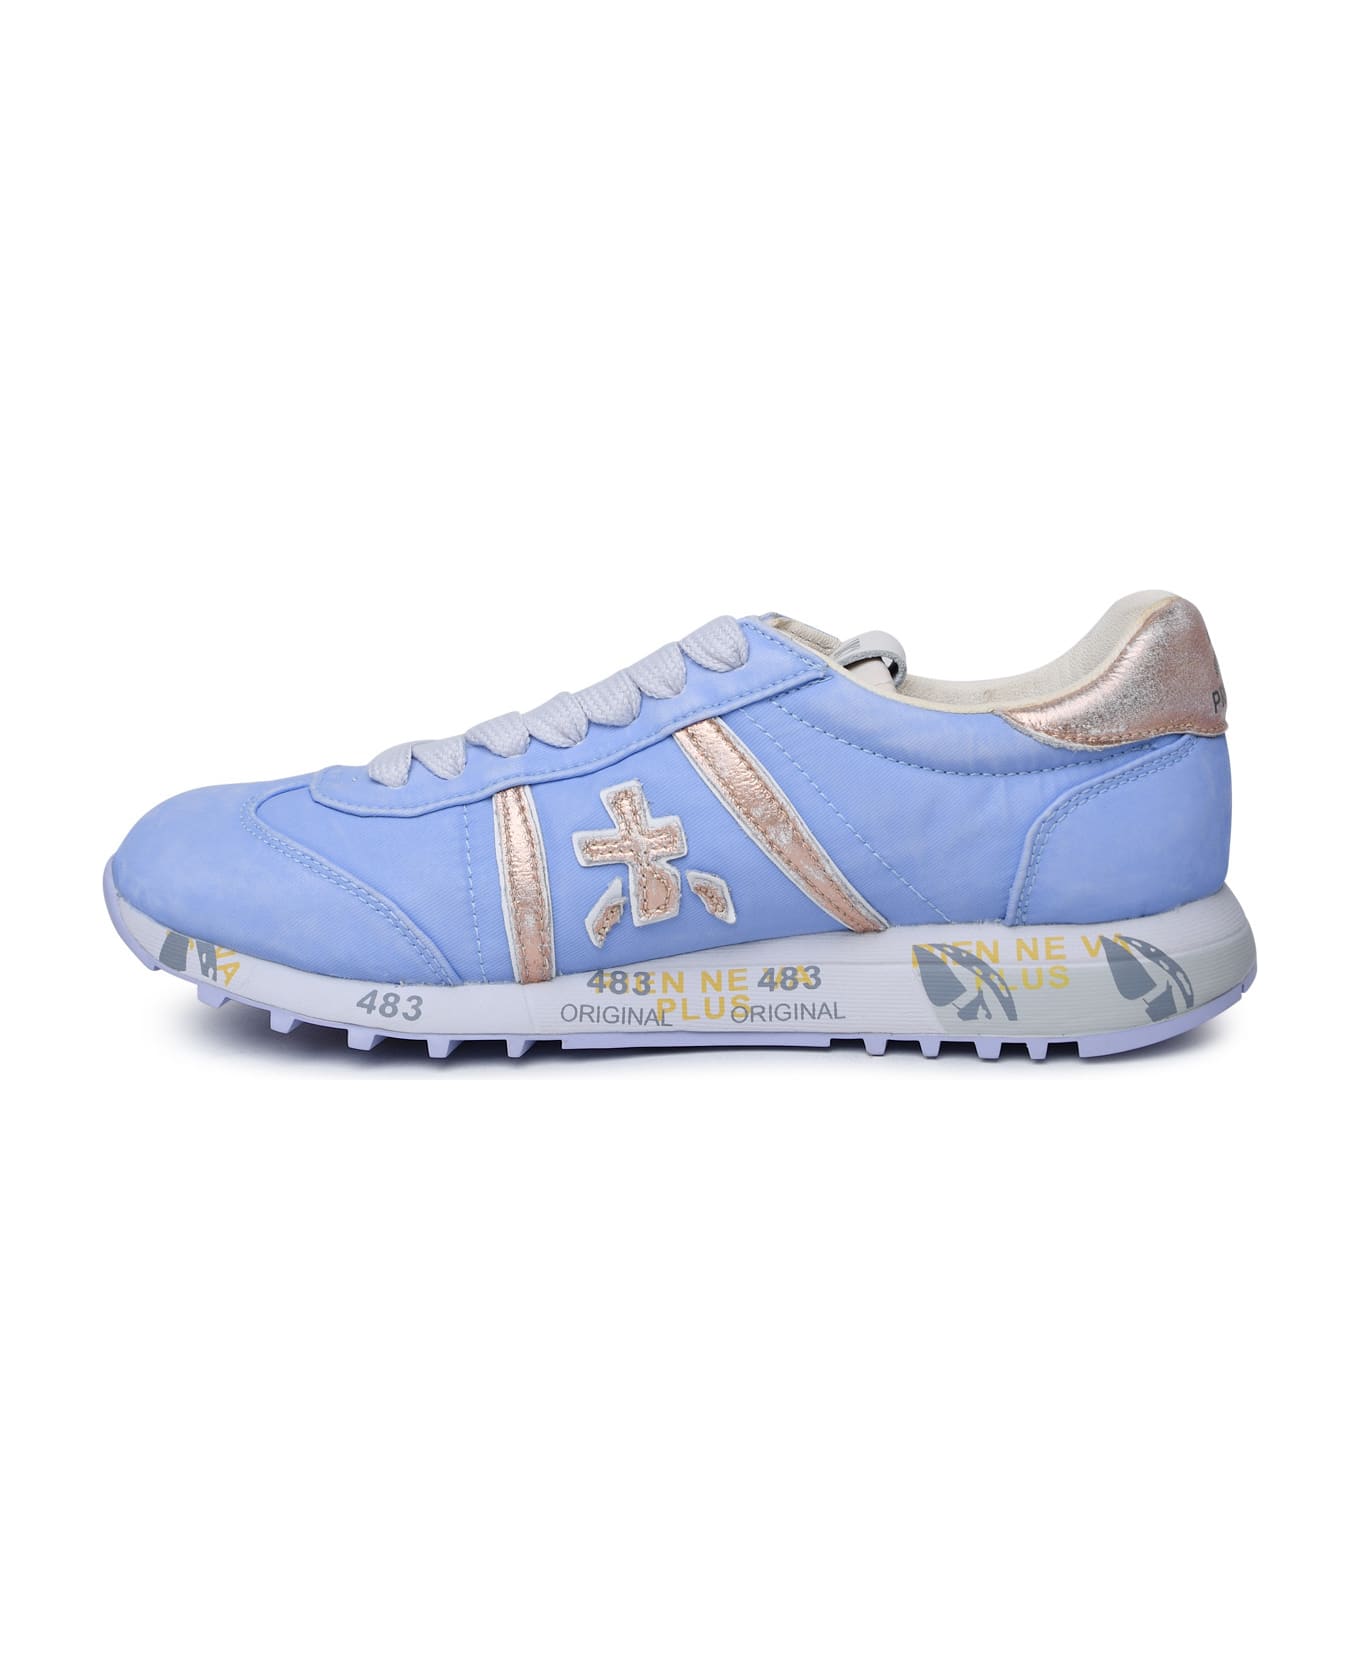 Premiata 'lucyd' Lilac Leather And Nylon Sneakers - Liliac スニーカー